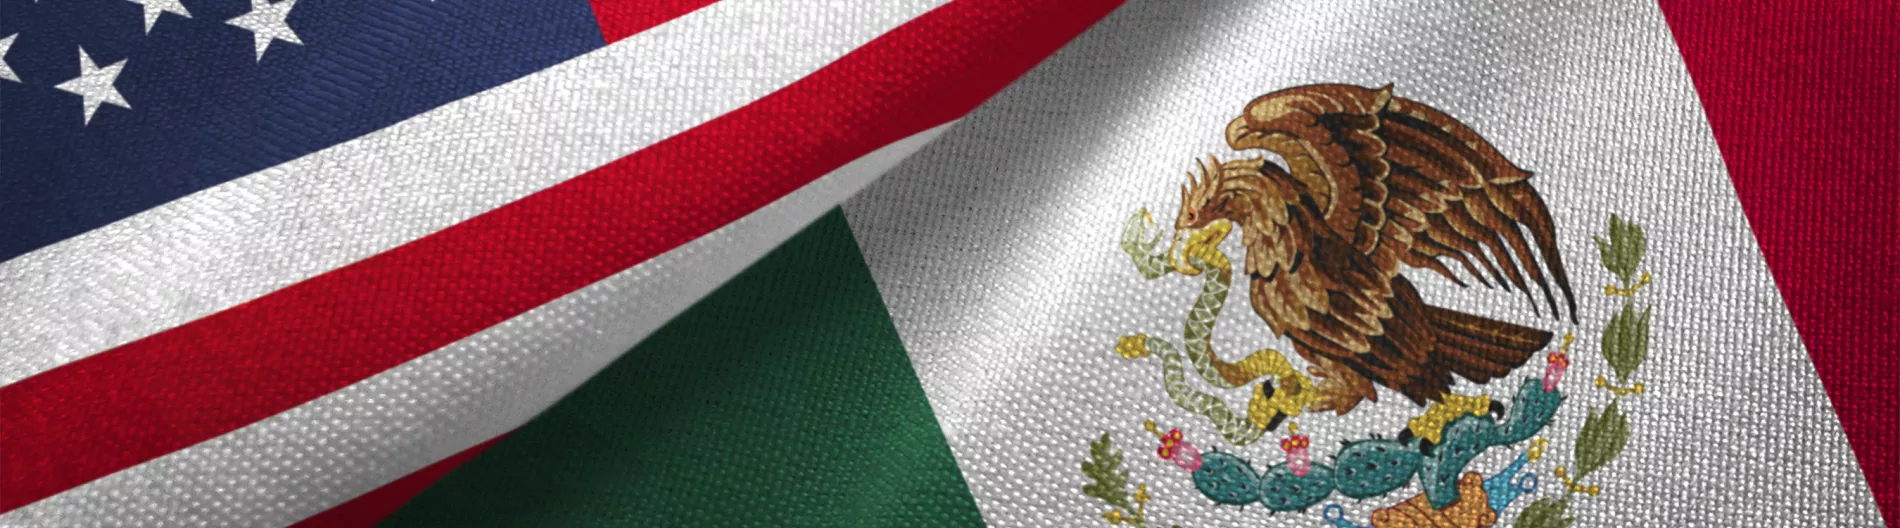 United States and Mexico Flag